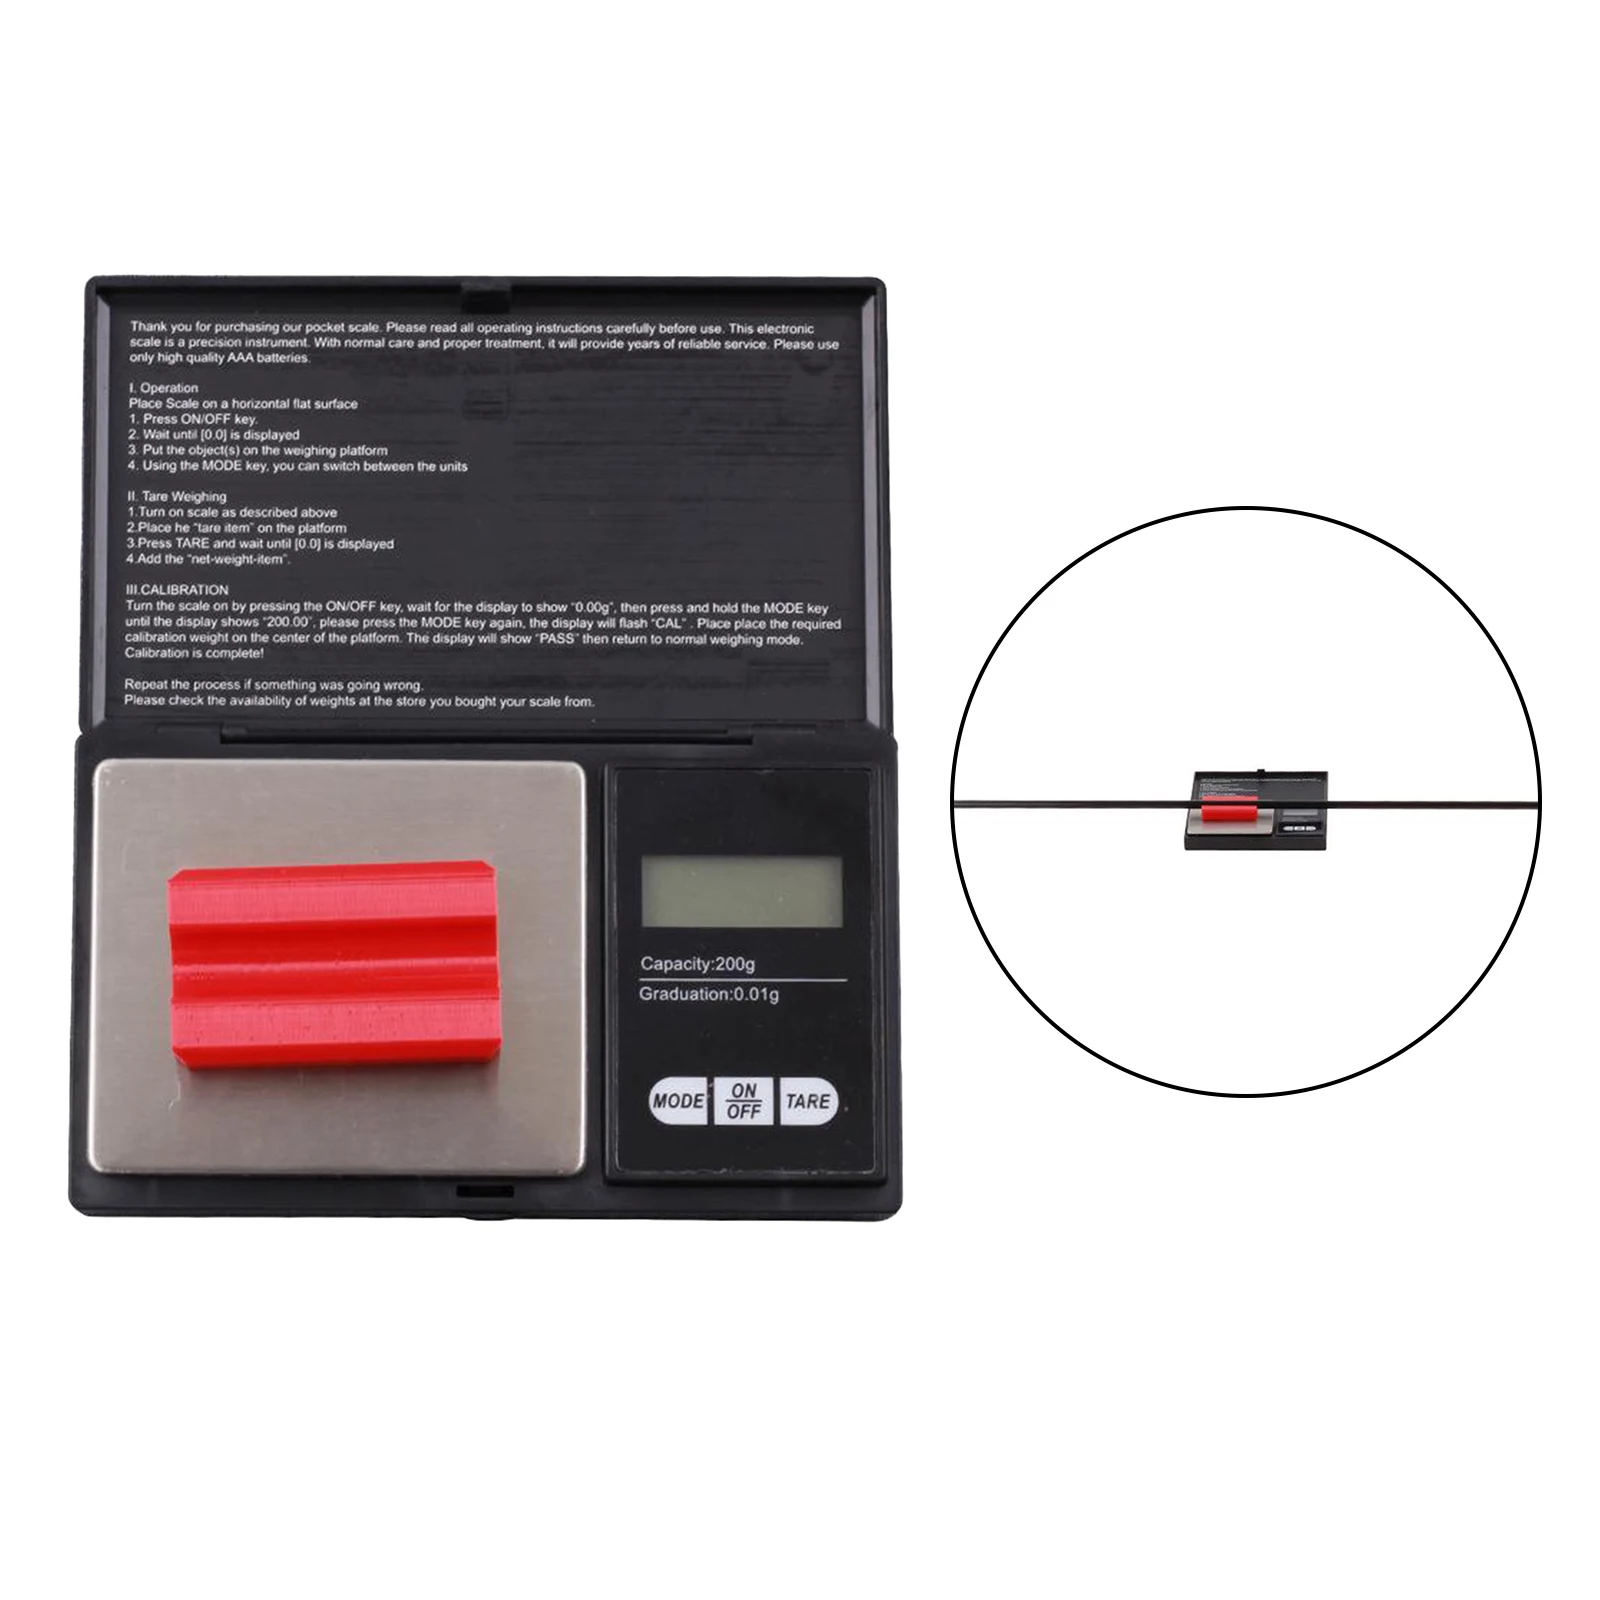 Digital Archery Scale High-Precision Portable Accurate Electronic Mini Scale LCD Display Gram Scales